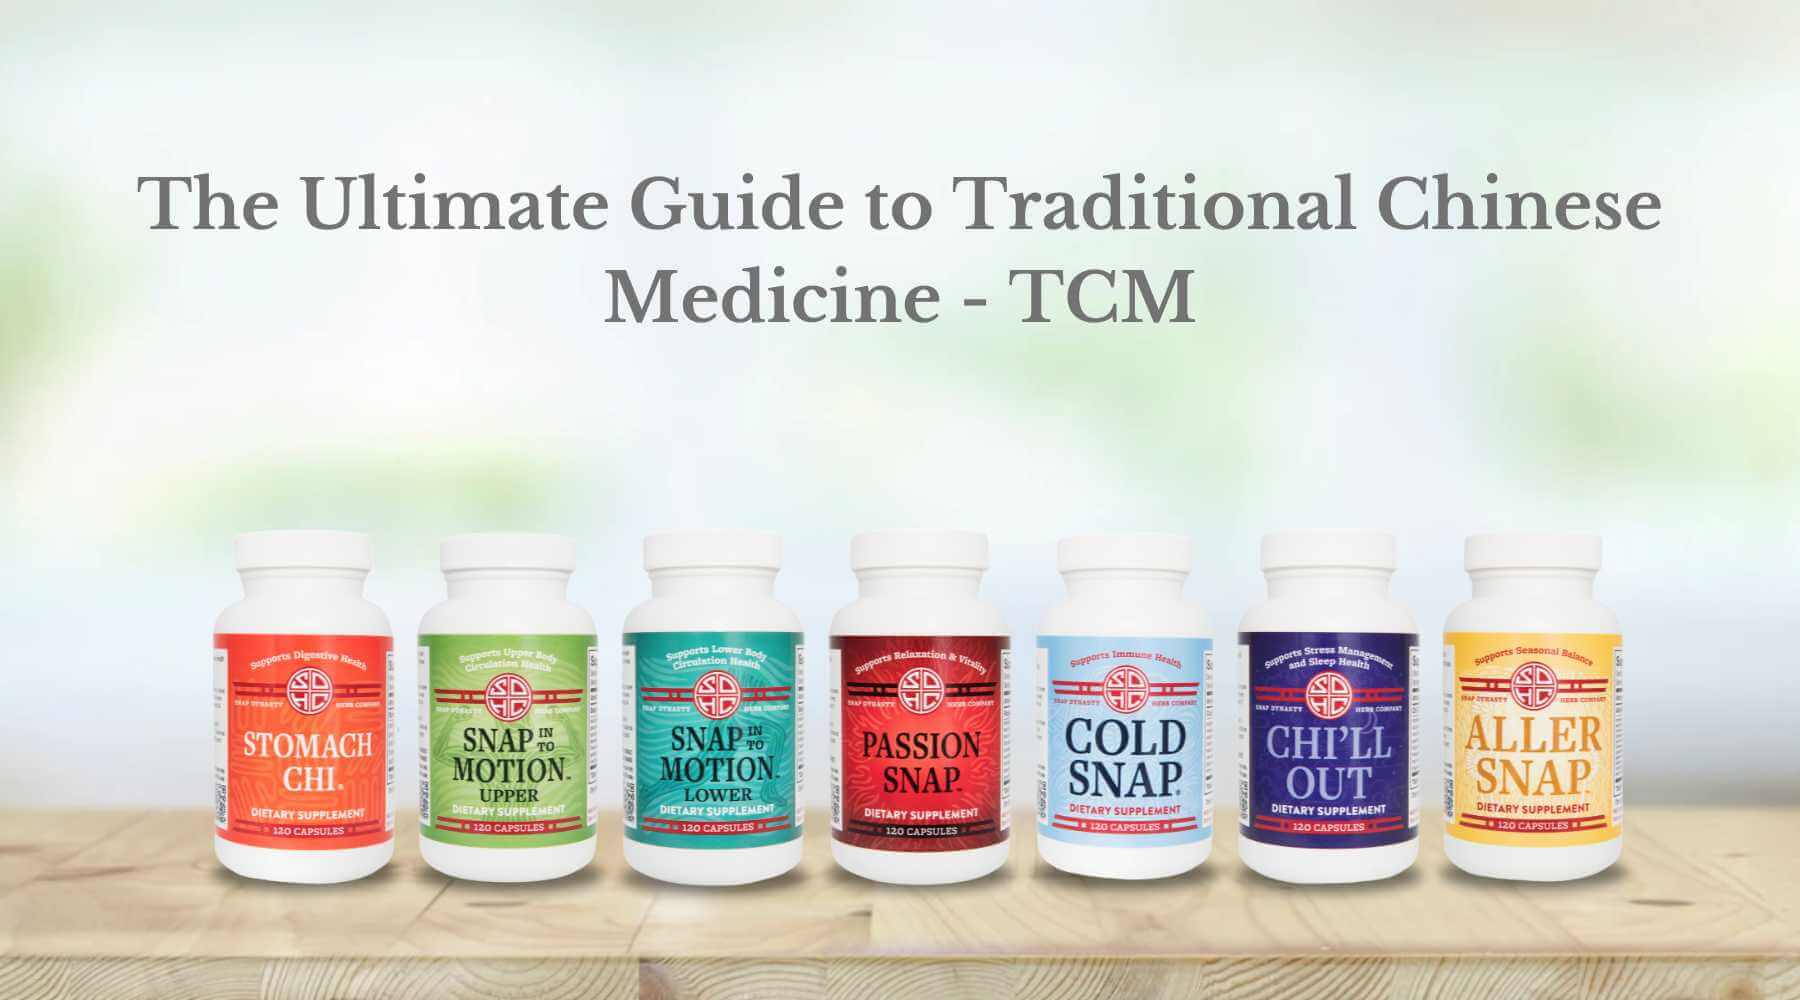 The Ultimate Guide to Traditional Chinese Medicine